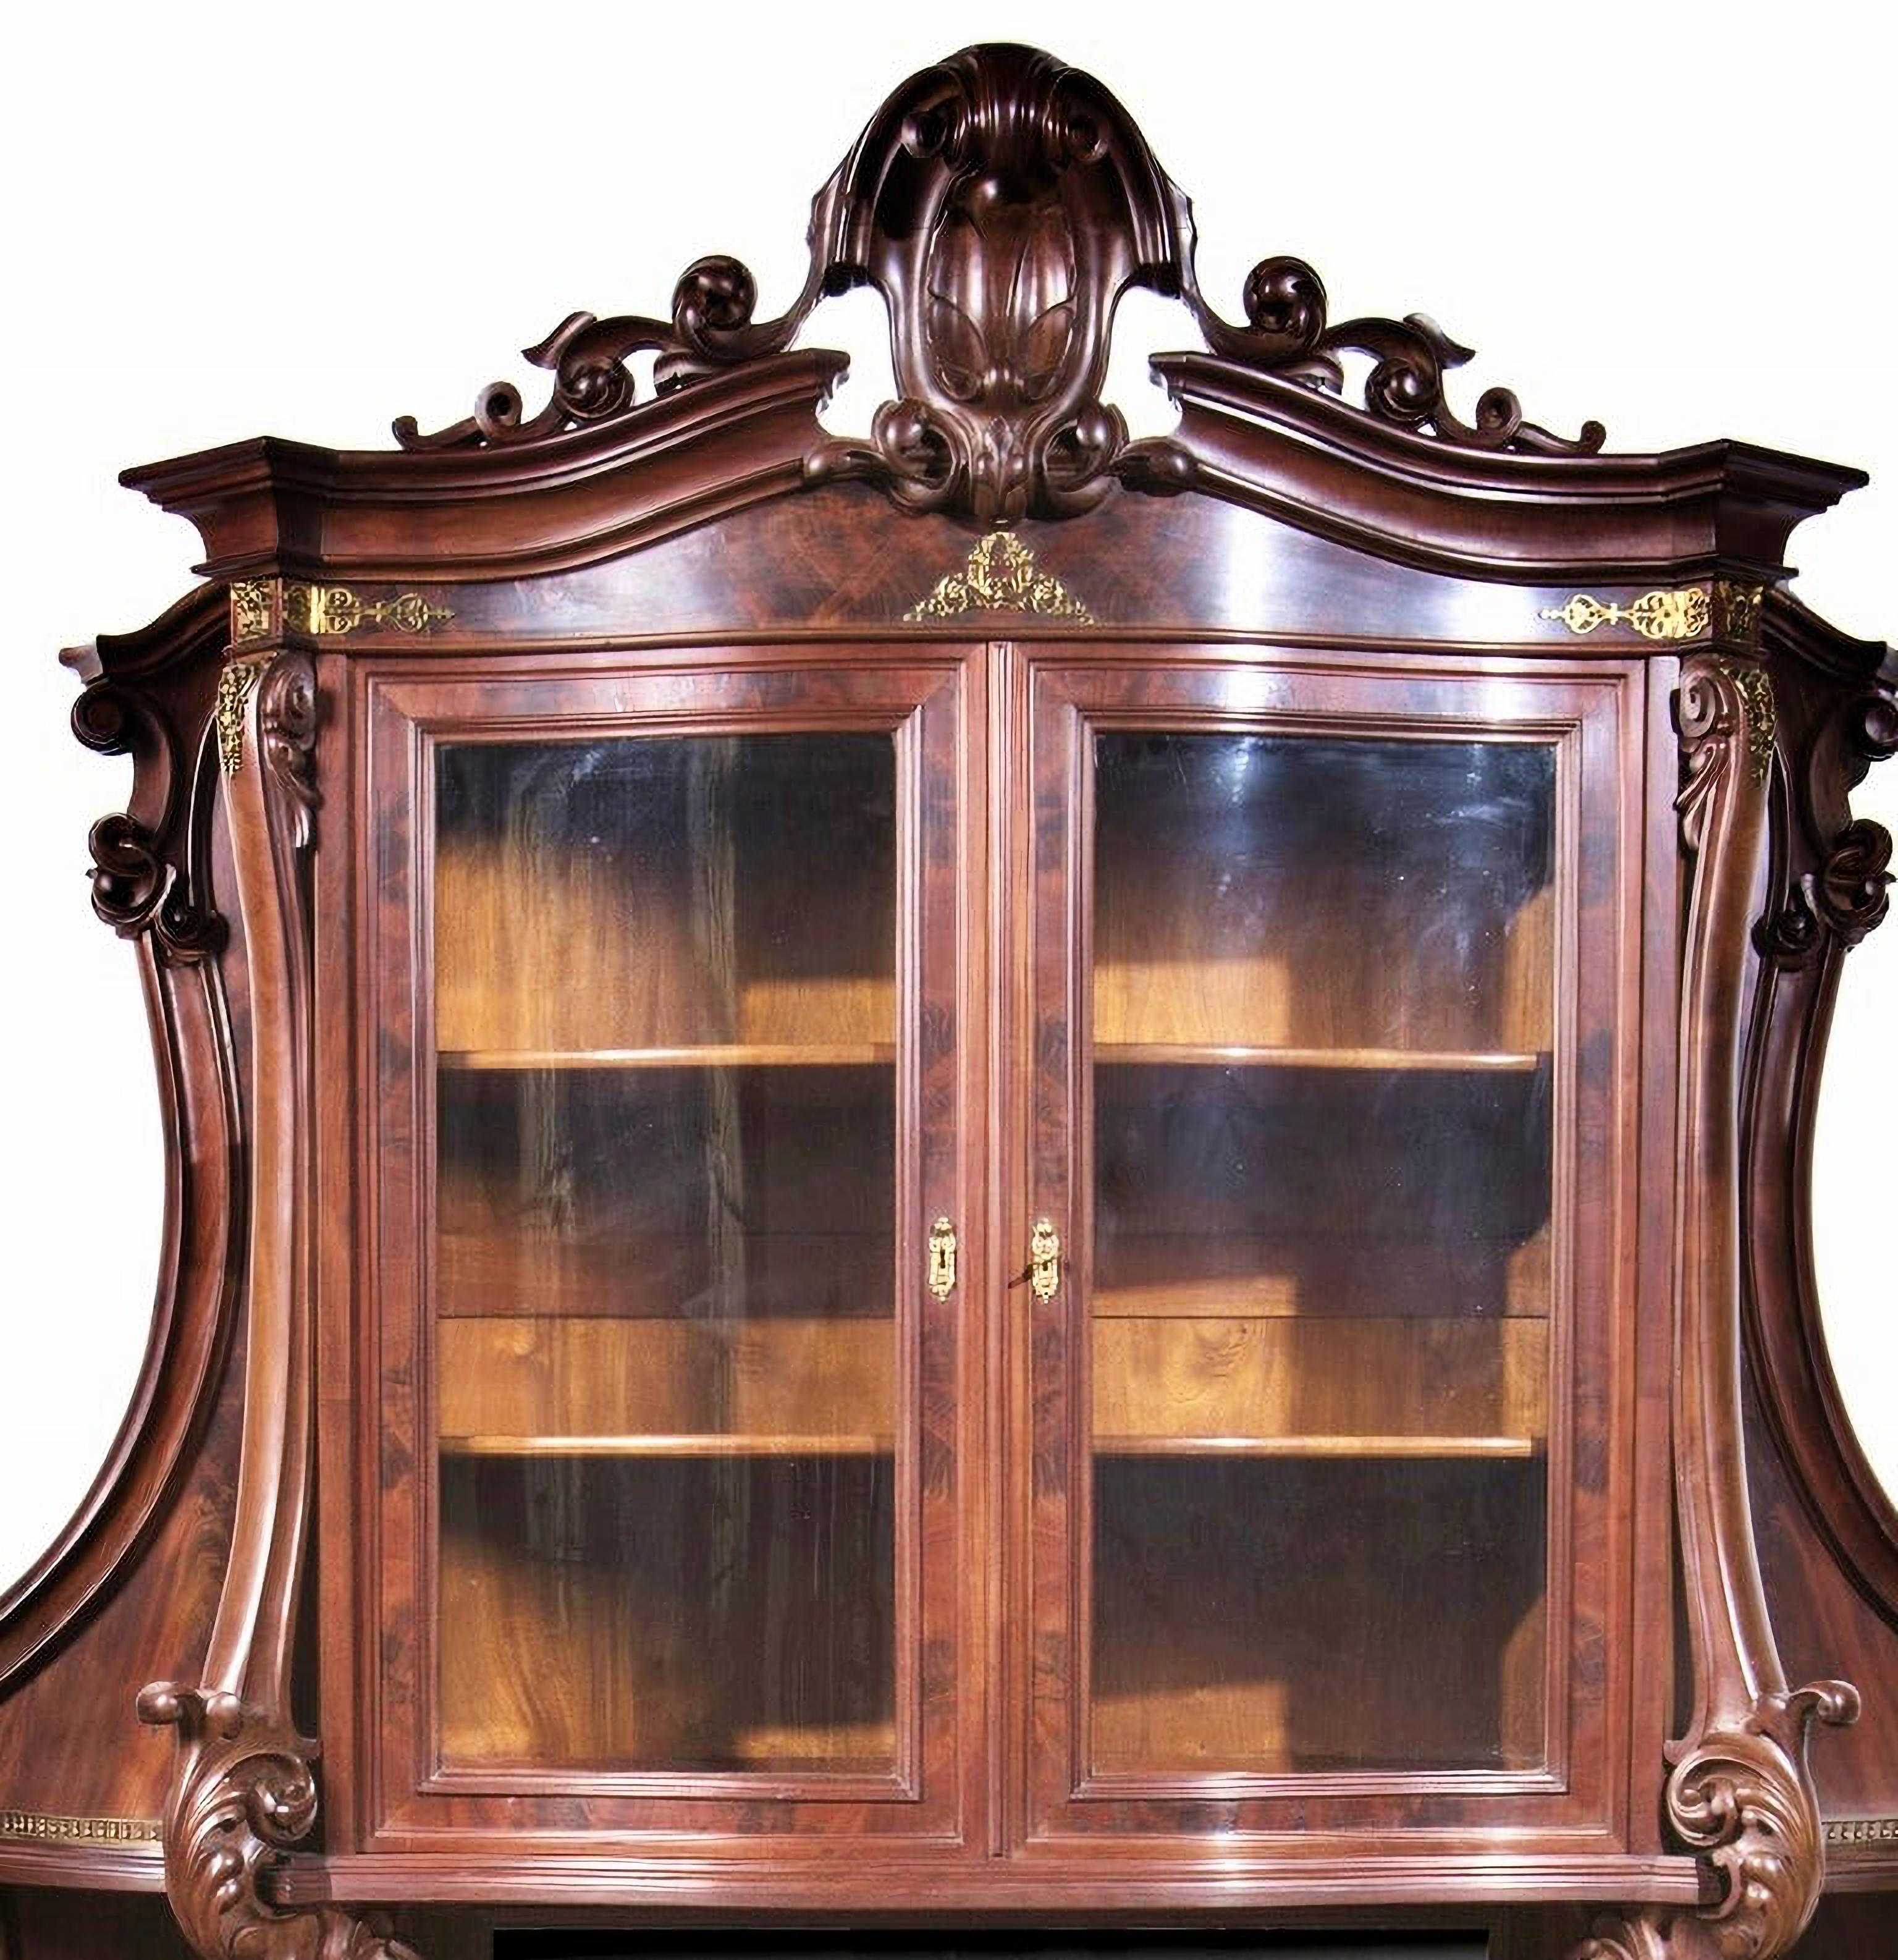 Victorian cabinet
English, 19th century
in mahogany wood. 
Lower body with one drawer and two doors. 
Upper body with mirror, two glass doors, interior with two shelves. 
Bronze applications 